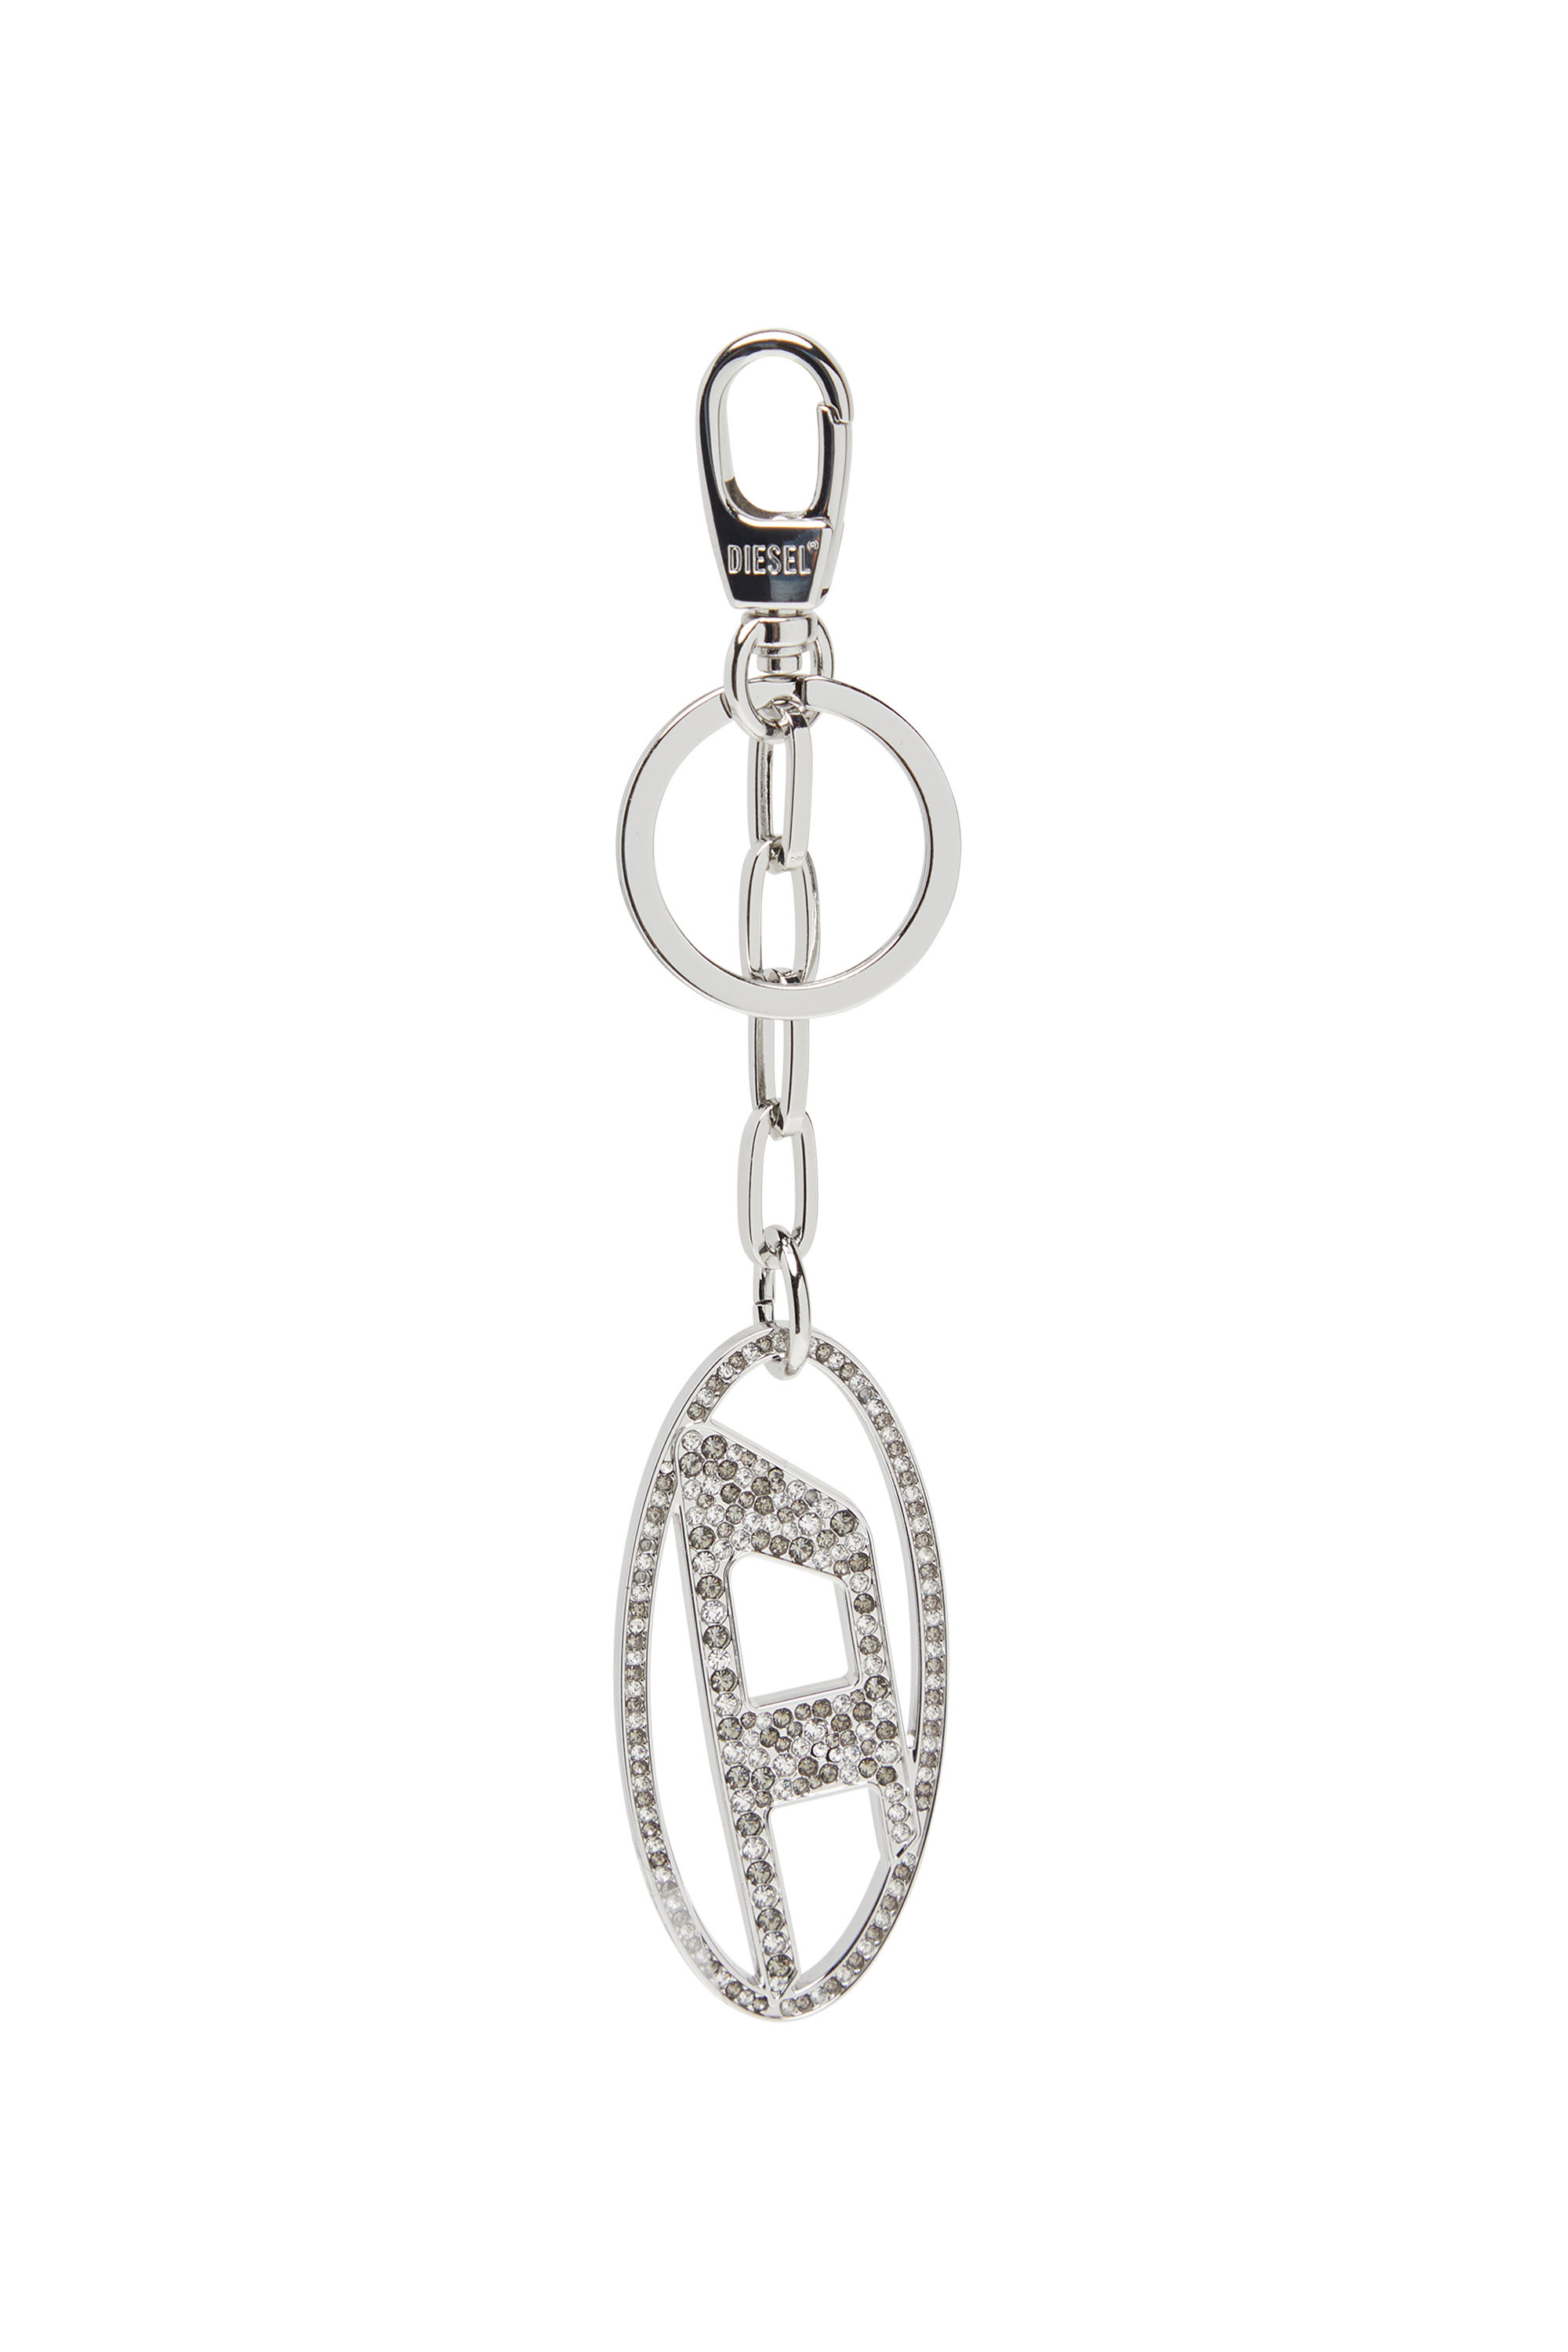 Diesel - HOLY-C, Female Metal Oval D keyring with crystals in シルバー - Image 1